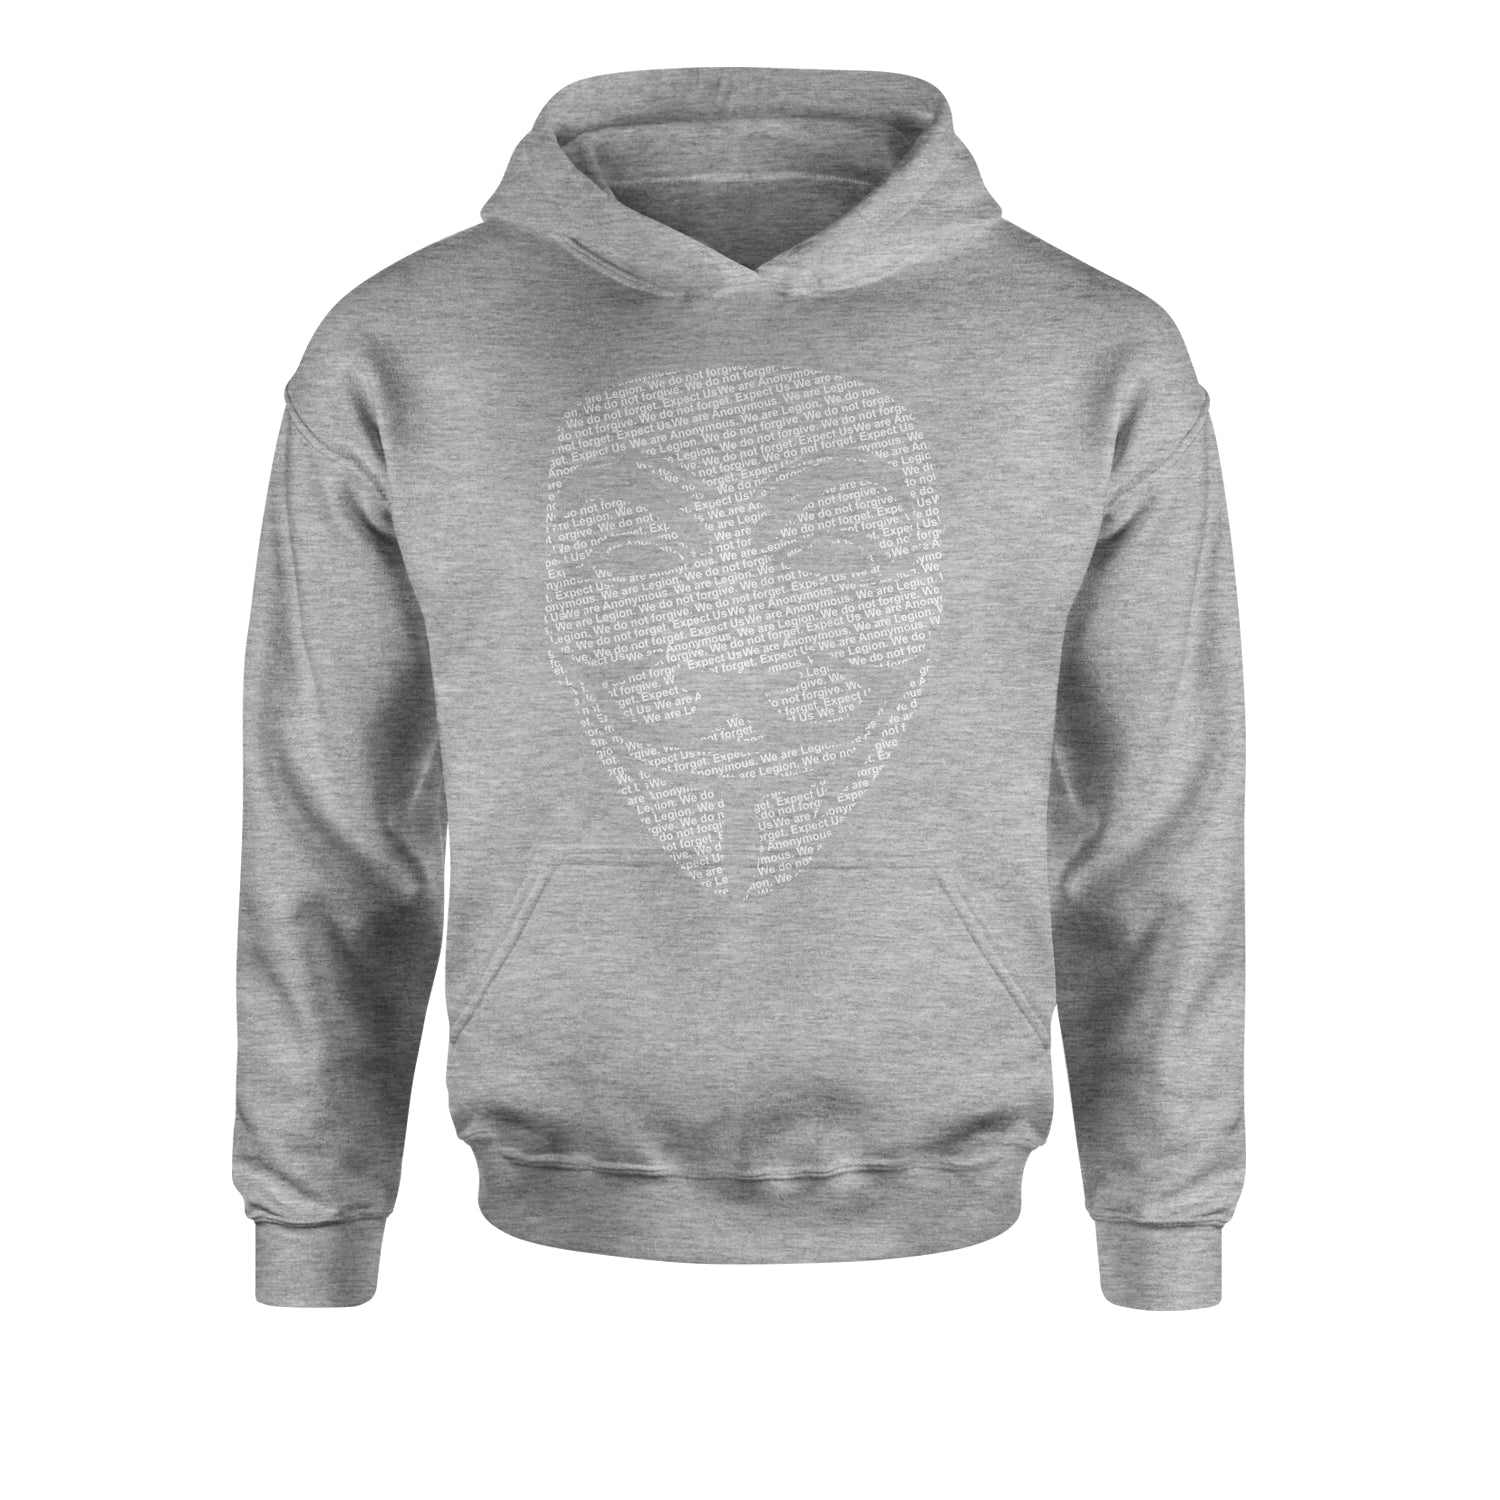 V For Vendetta Anonymous Mask Youth-Sized Hoodie #expressiontees by Expression Tees